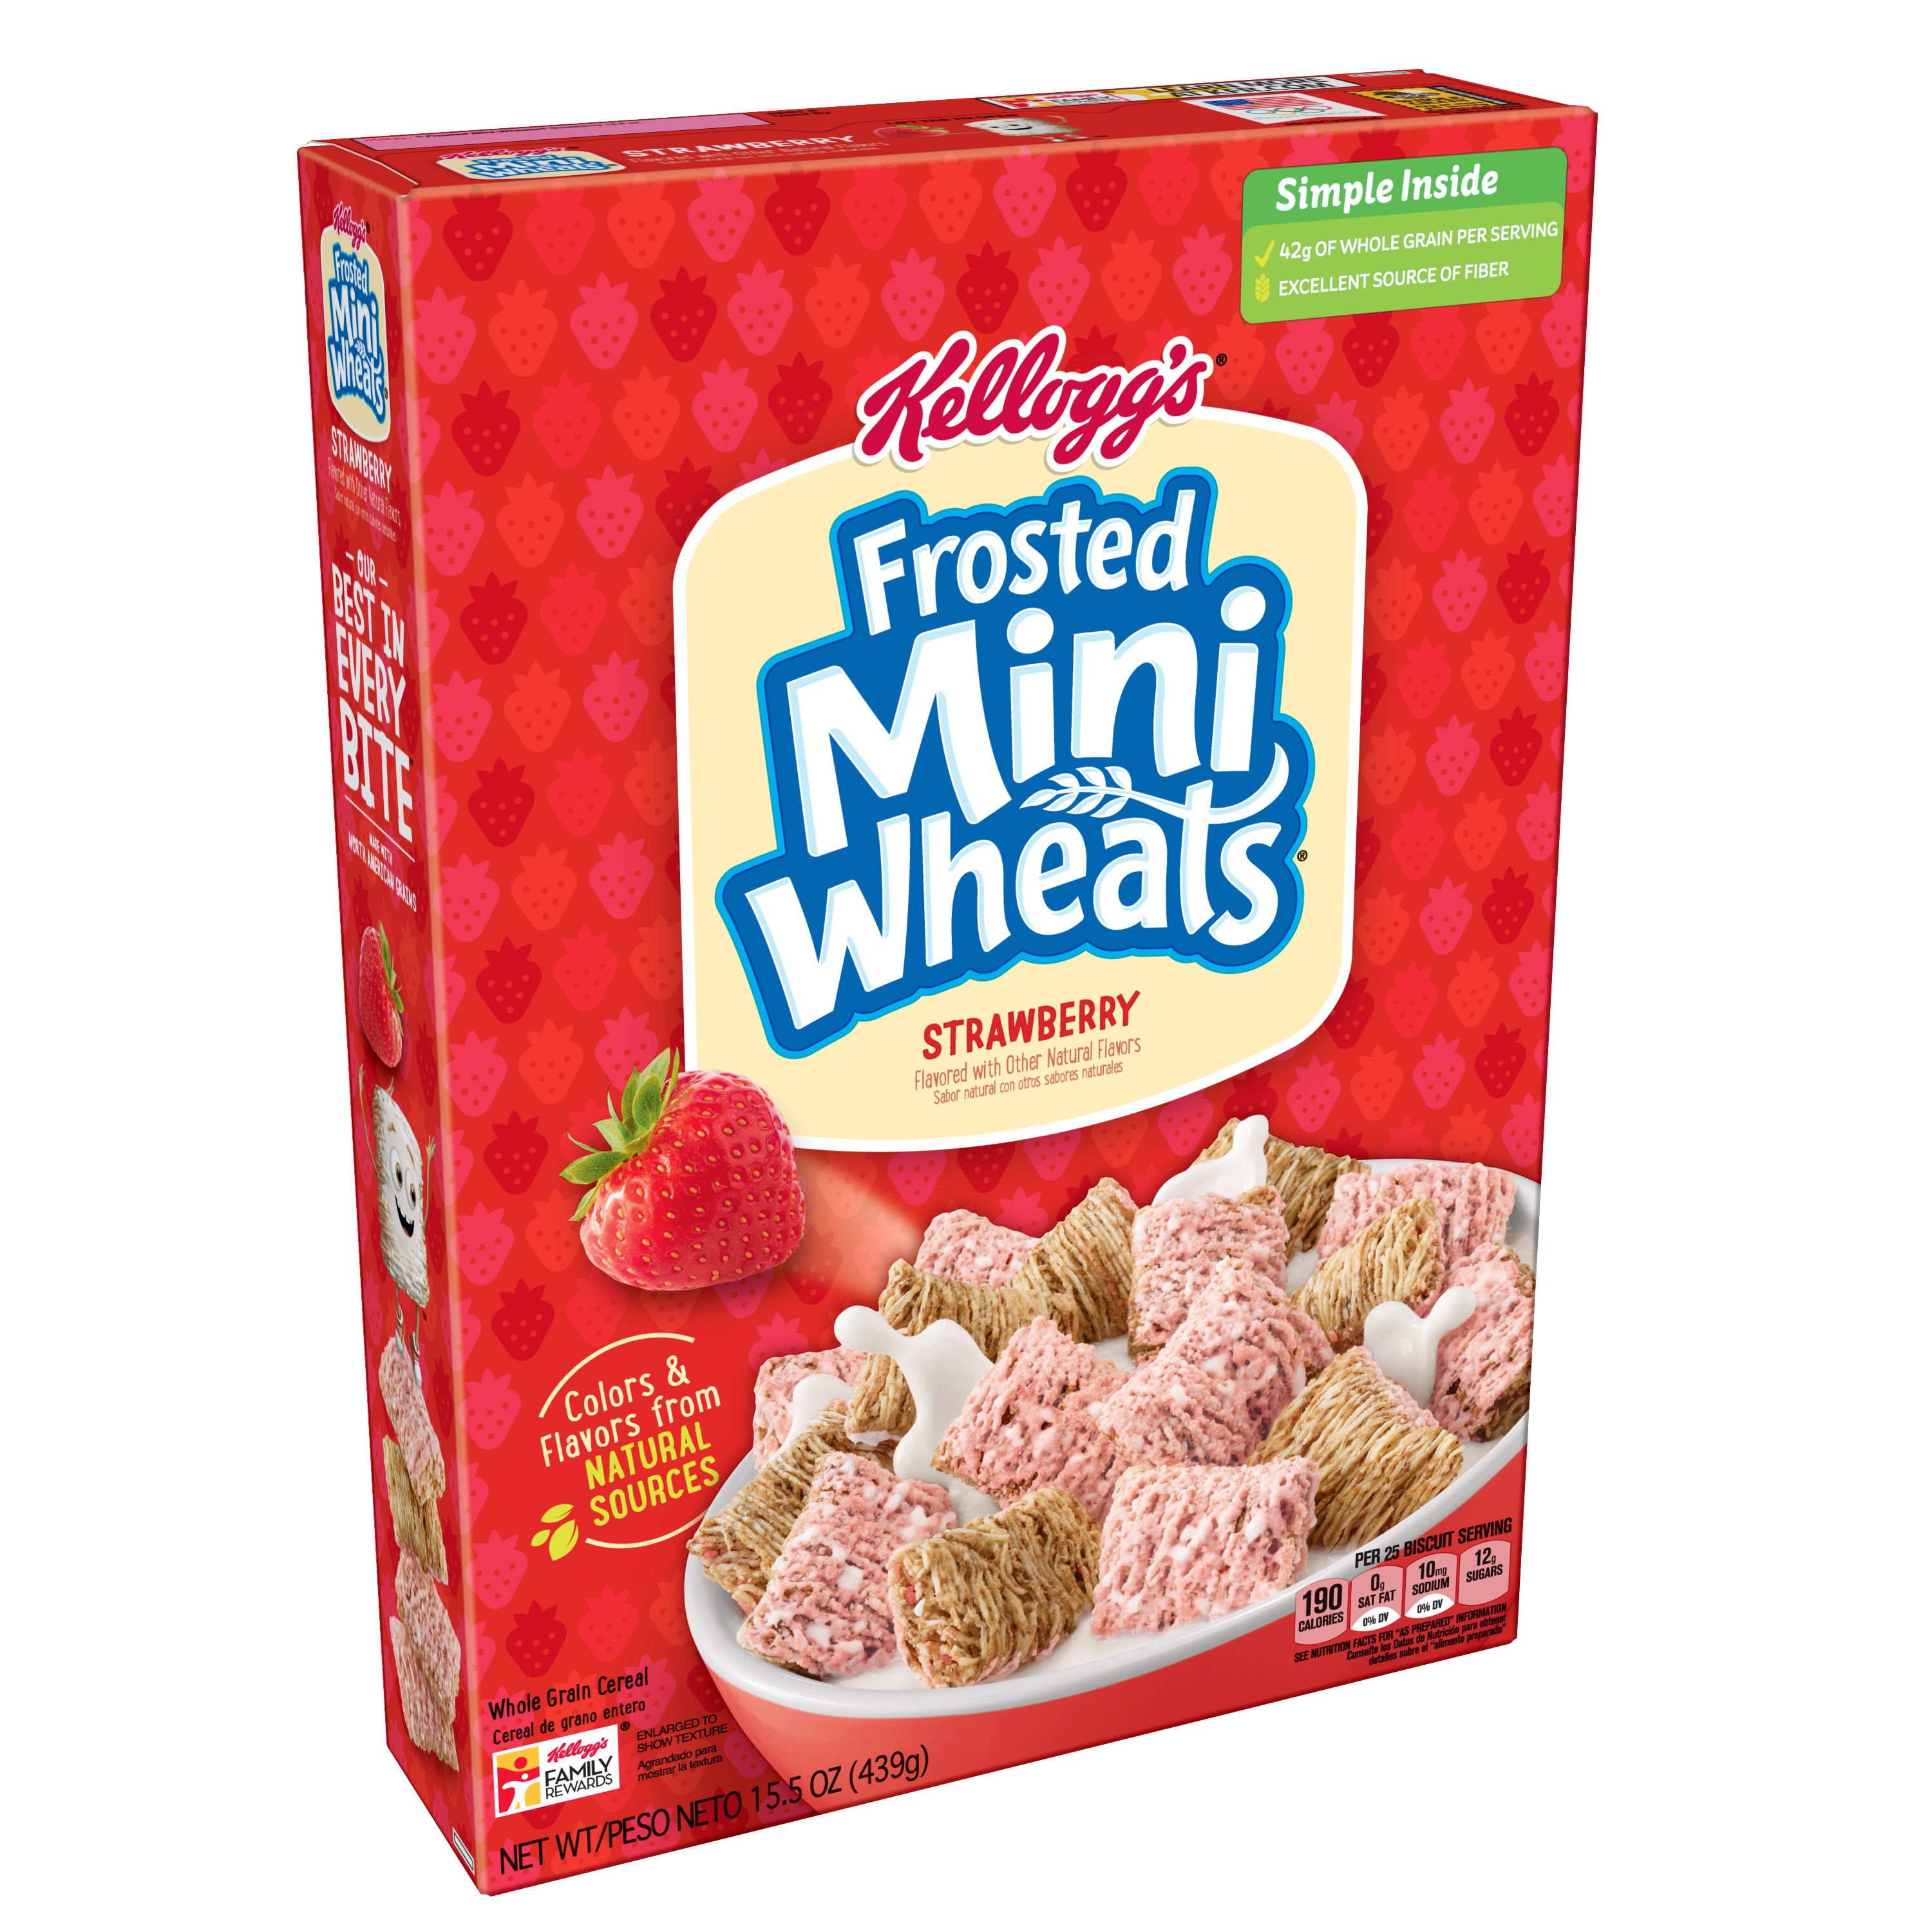 Kellogg's ® Frosted Mini-Wheats ® Strawberry cereal. 